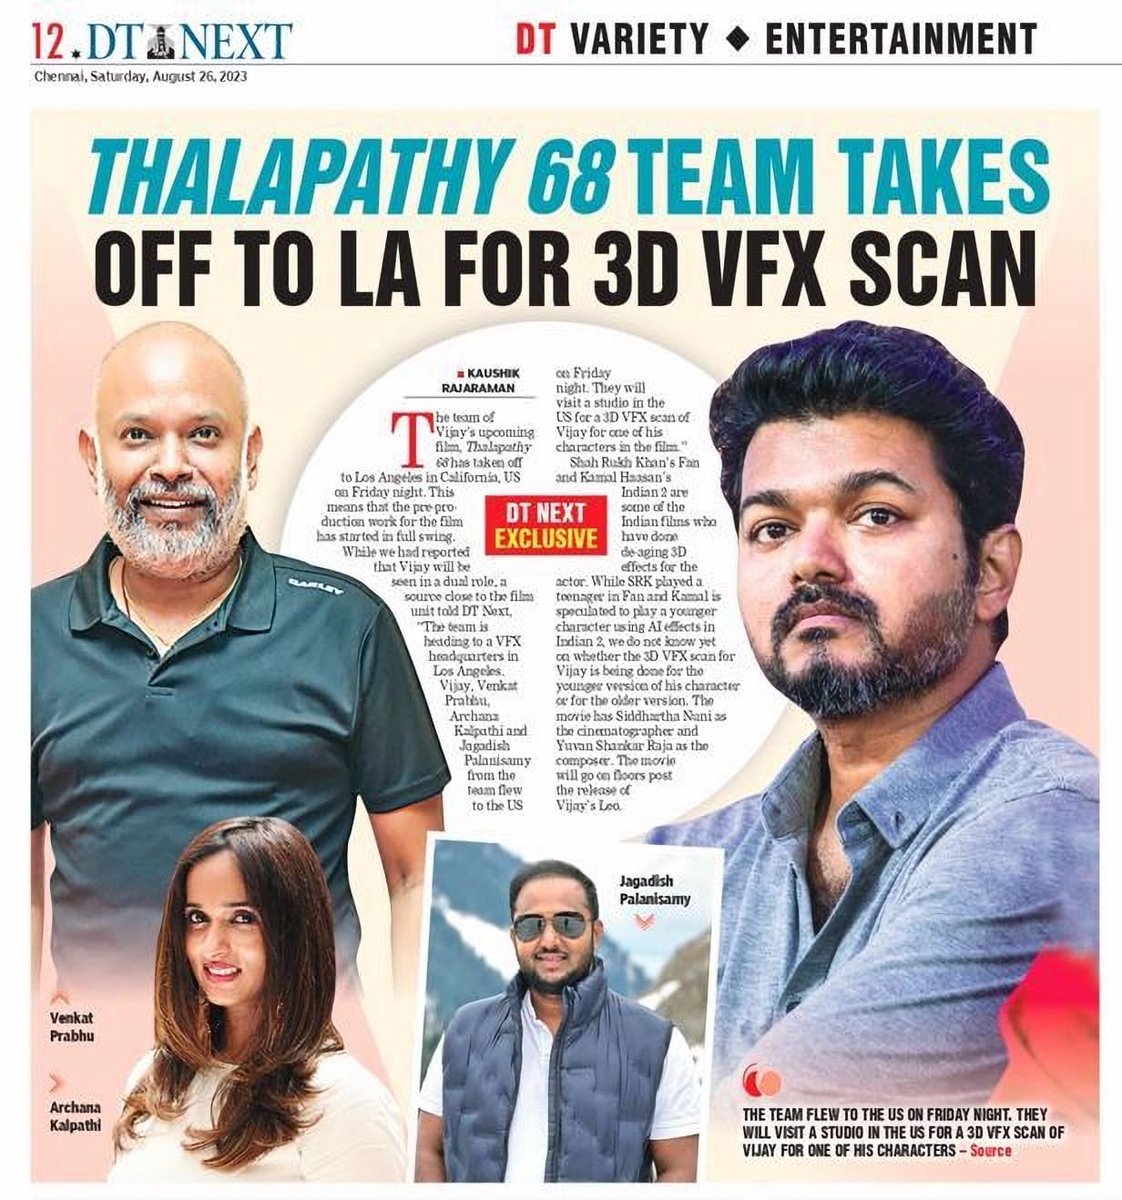 #DTNextExclusive: The team of #Thalapathy68, @actorvijay, @vp_offl, @archanakalpathi and @Jagadishbliss has taken off to #LosAngeles in California, US on Friday night for a 3D VFX scan for #Vijay's character look.

🖋️ @iamkaushikr

Read more:
dtnext.in/news/cinema/th…

#Vijay68